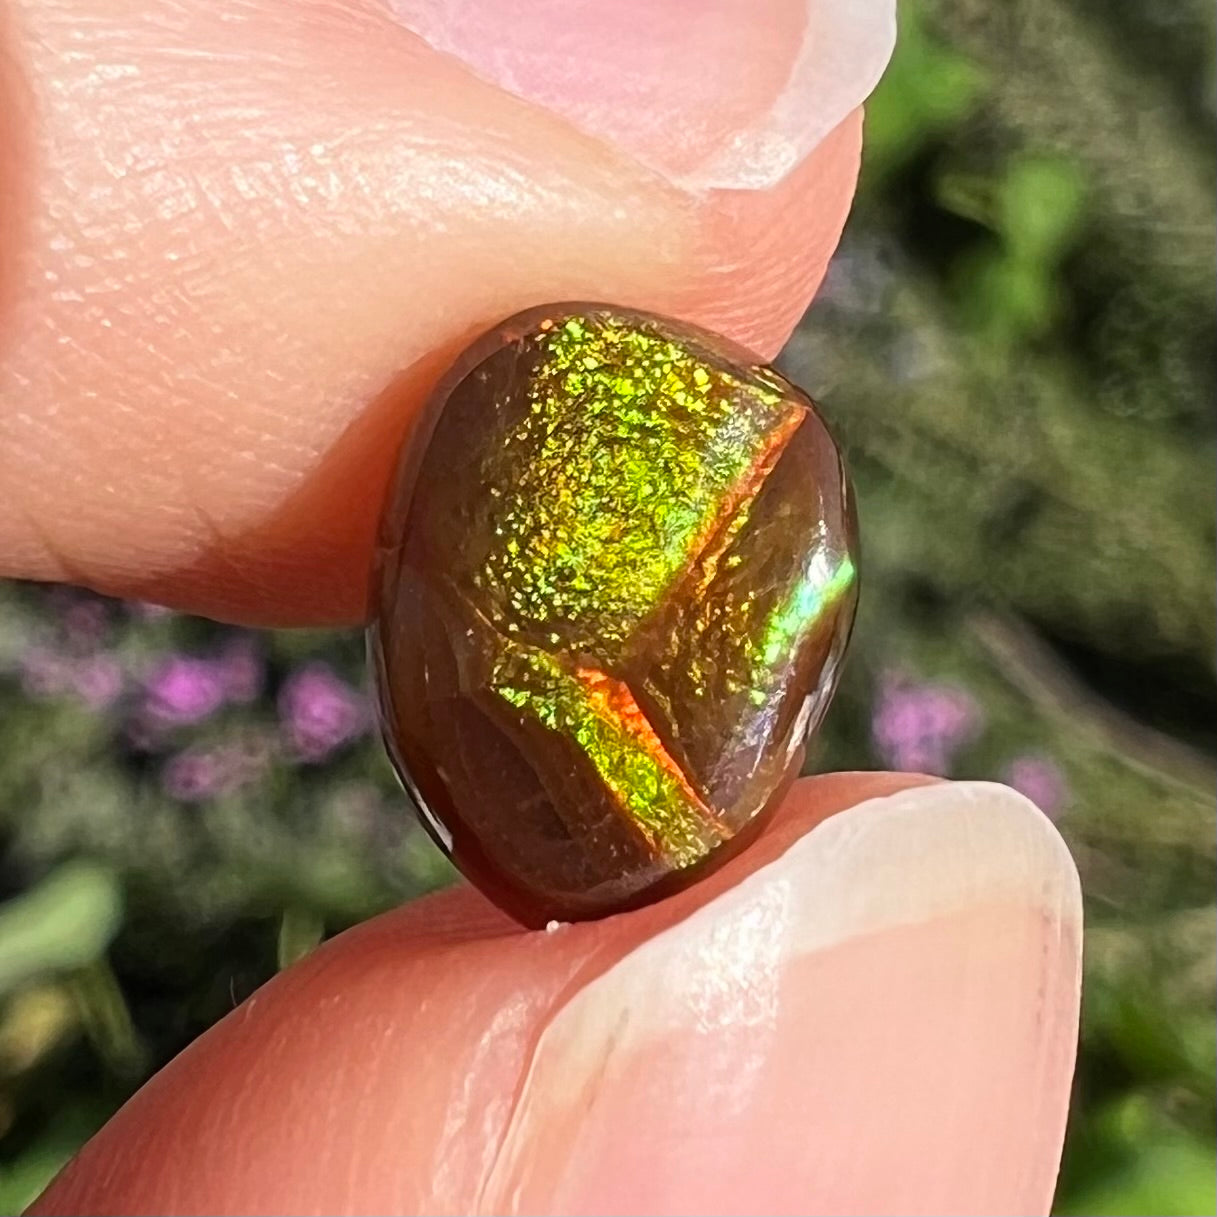 A pear shaped Mexican fire agate cabochon.  The stone has a glittery luster with green and orange colors.